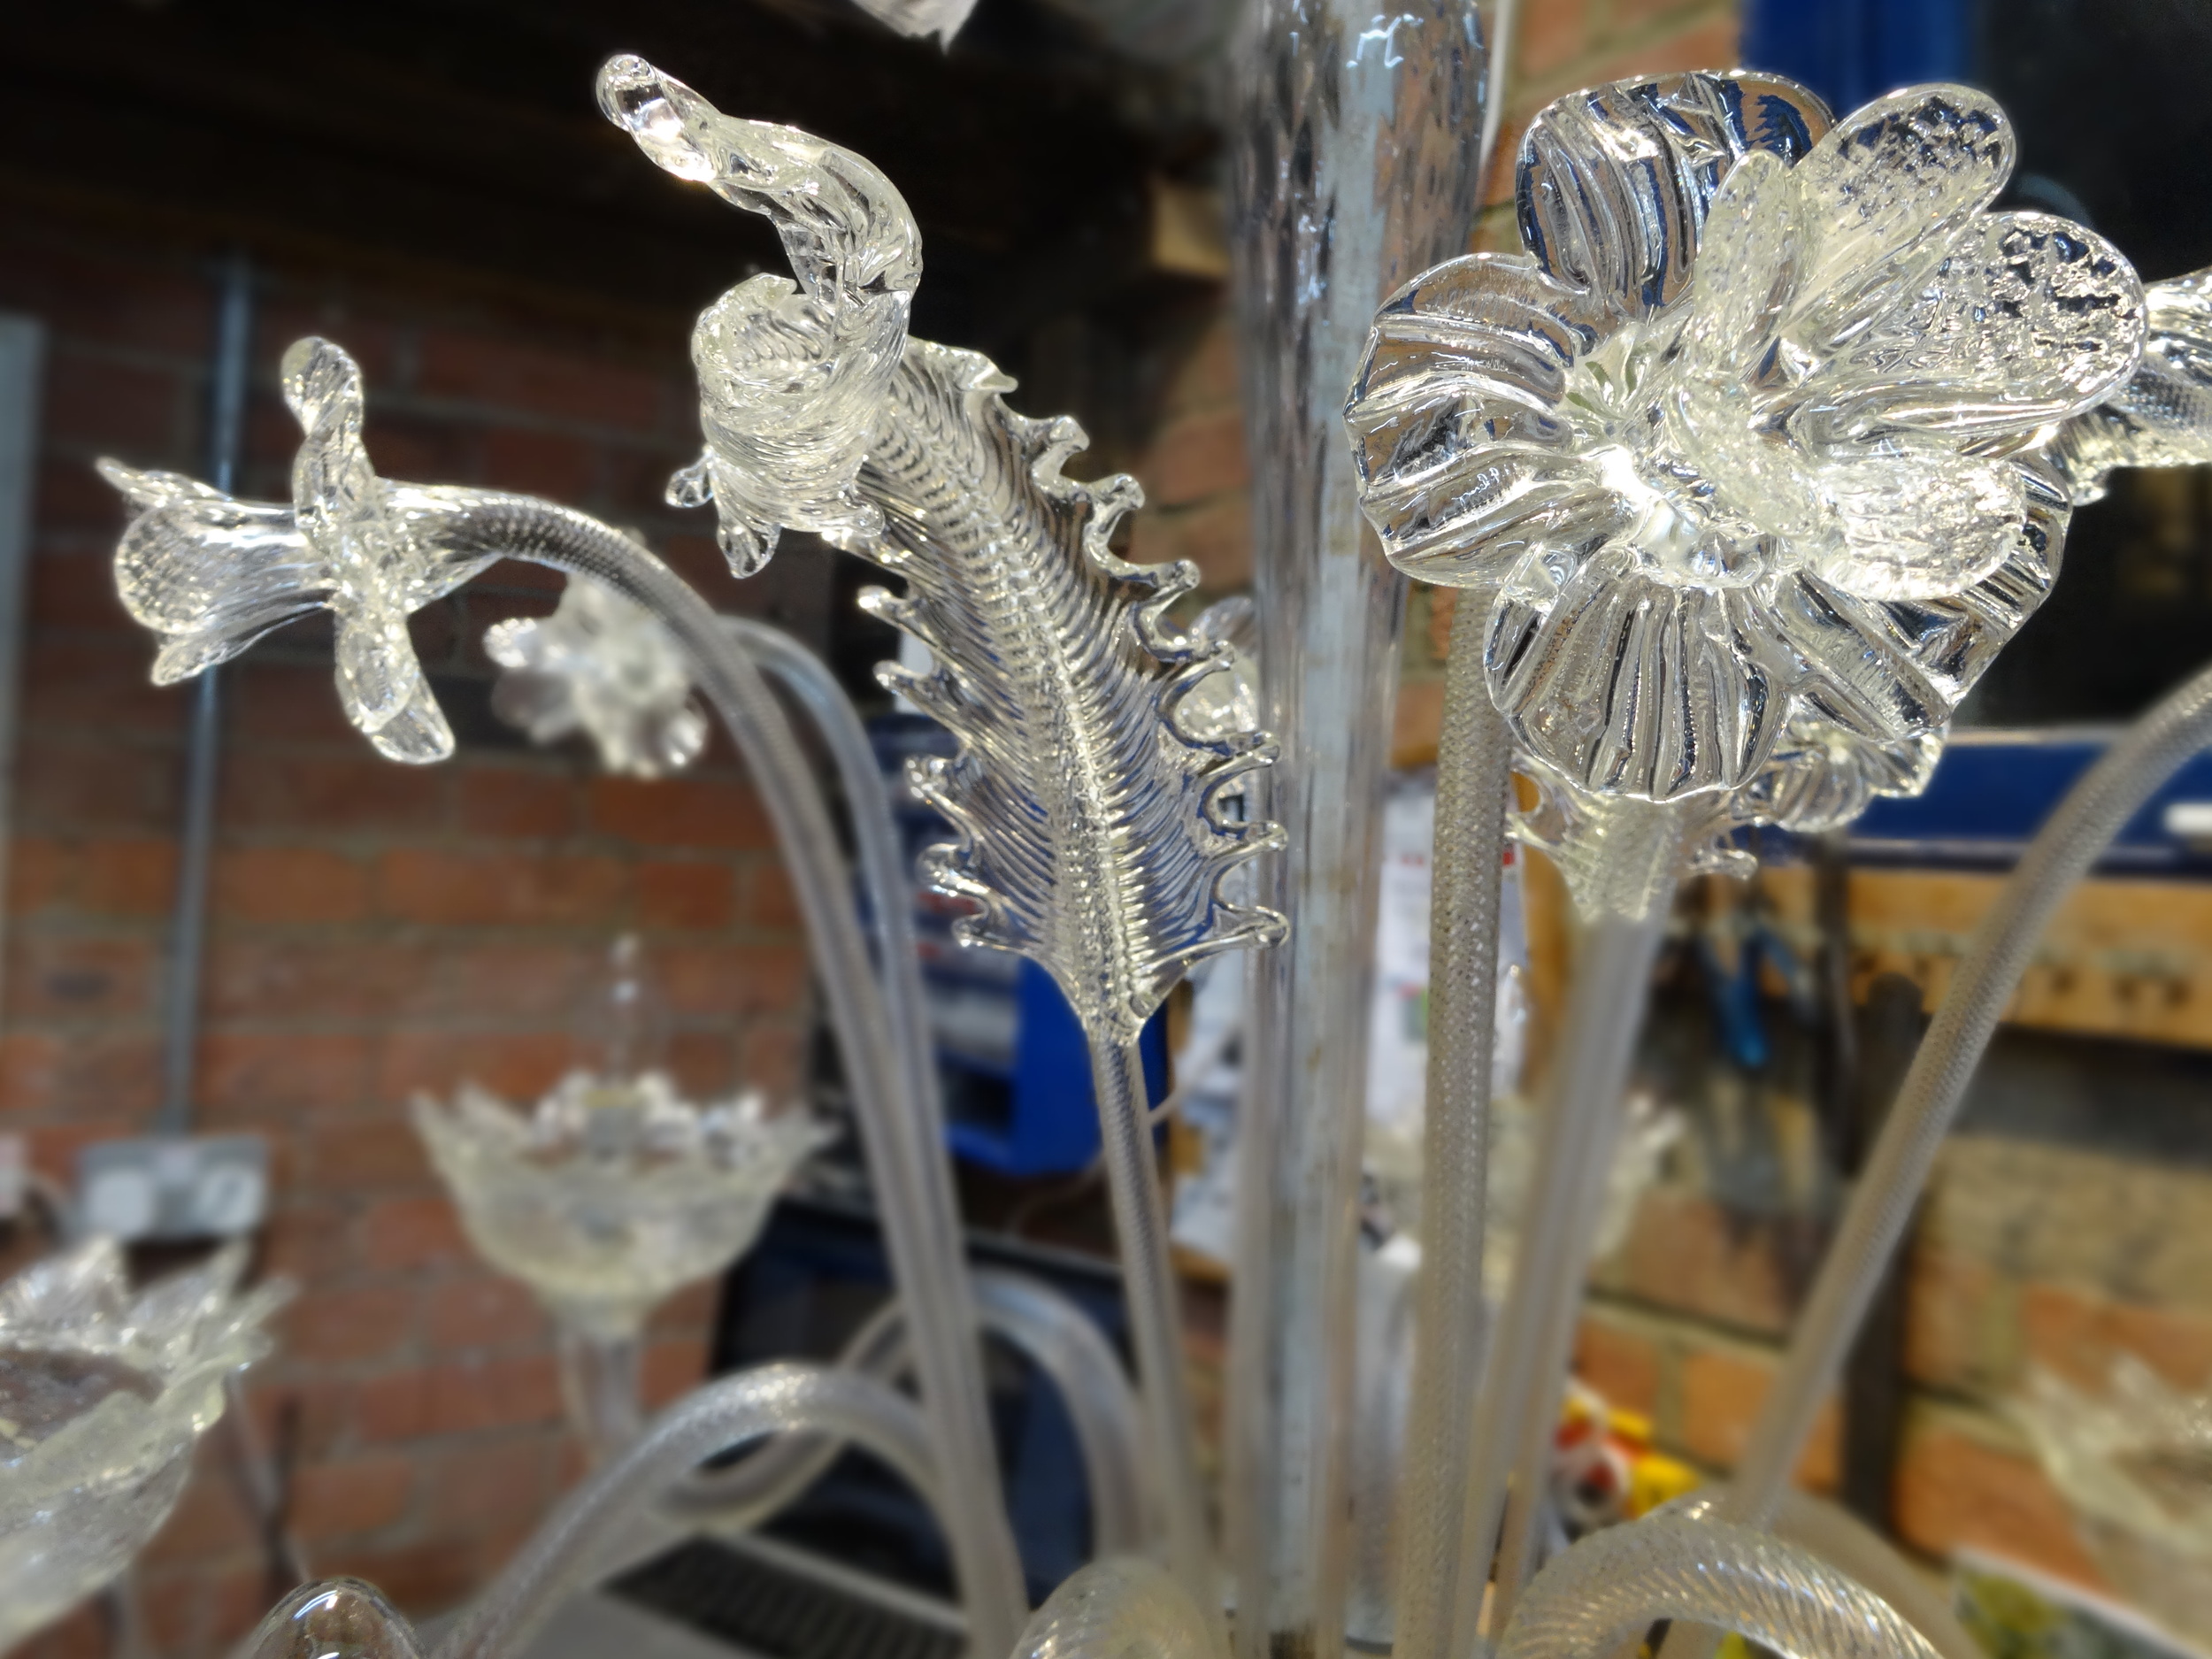 Murano glass - after.